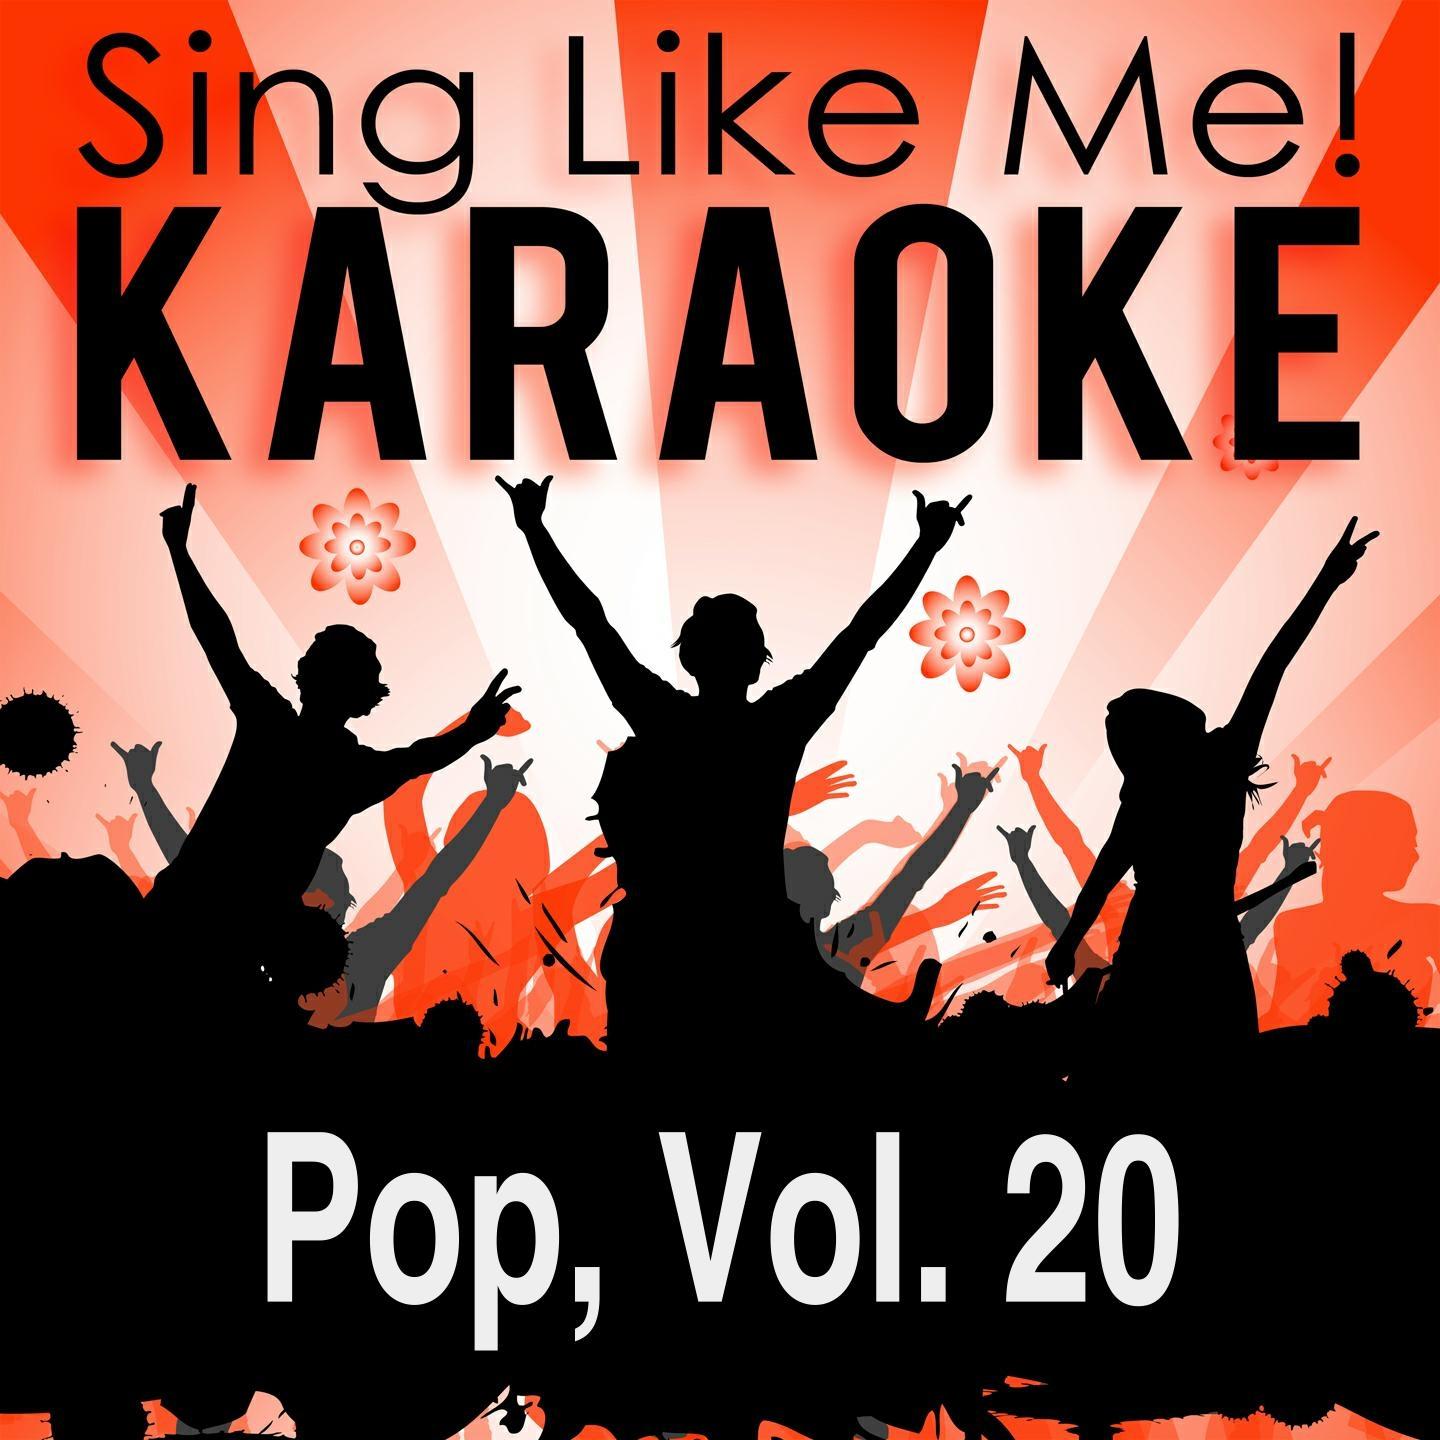 Maybe Tonight (Karaoke Version With Guide Melody) (Originally Performed By Kate DeAraugo)